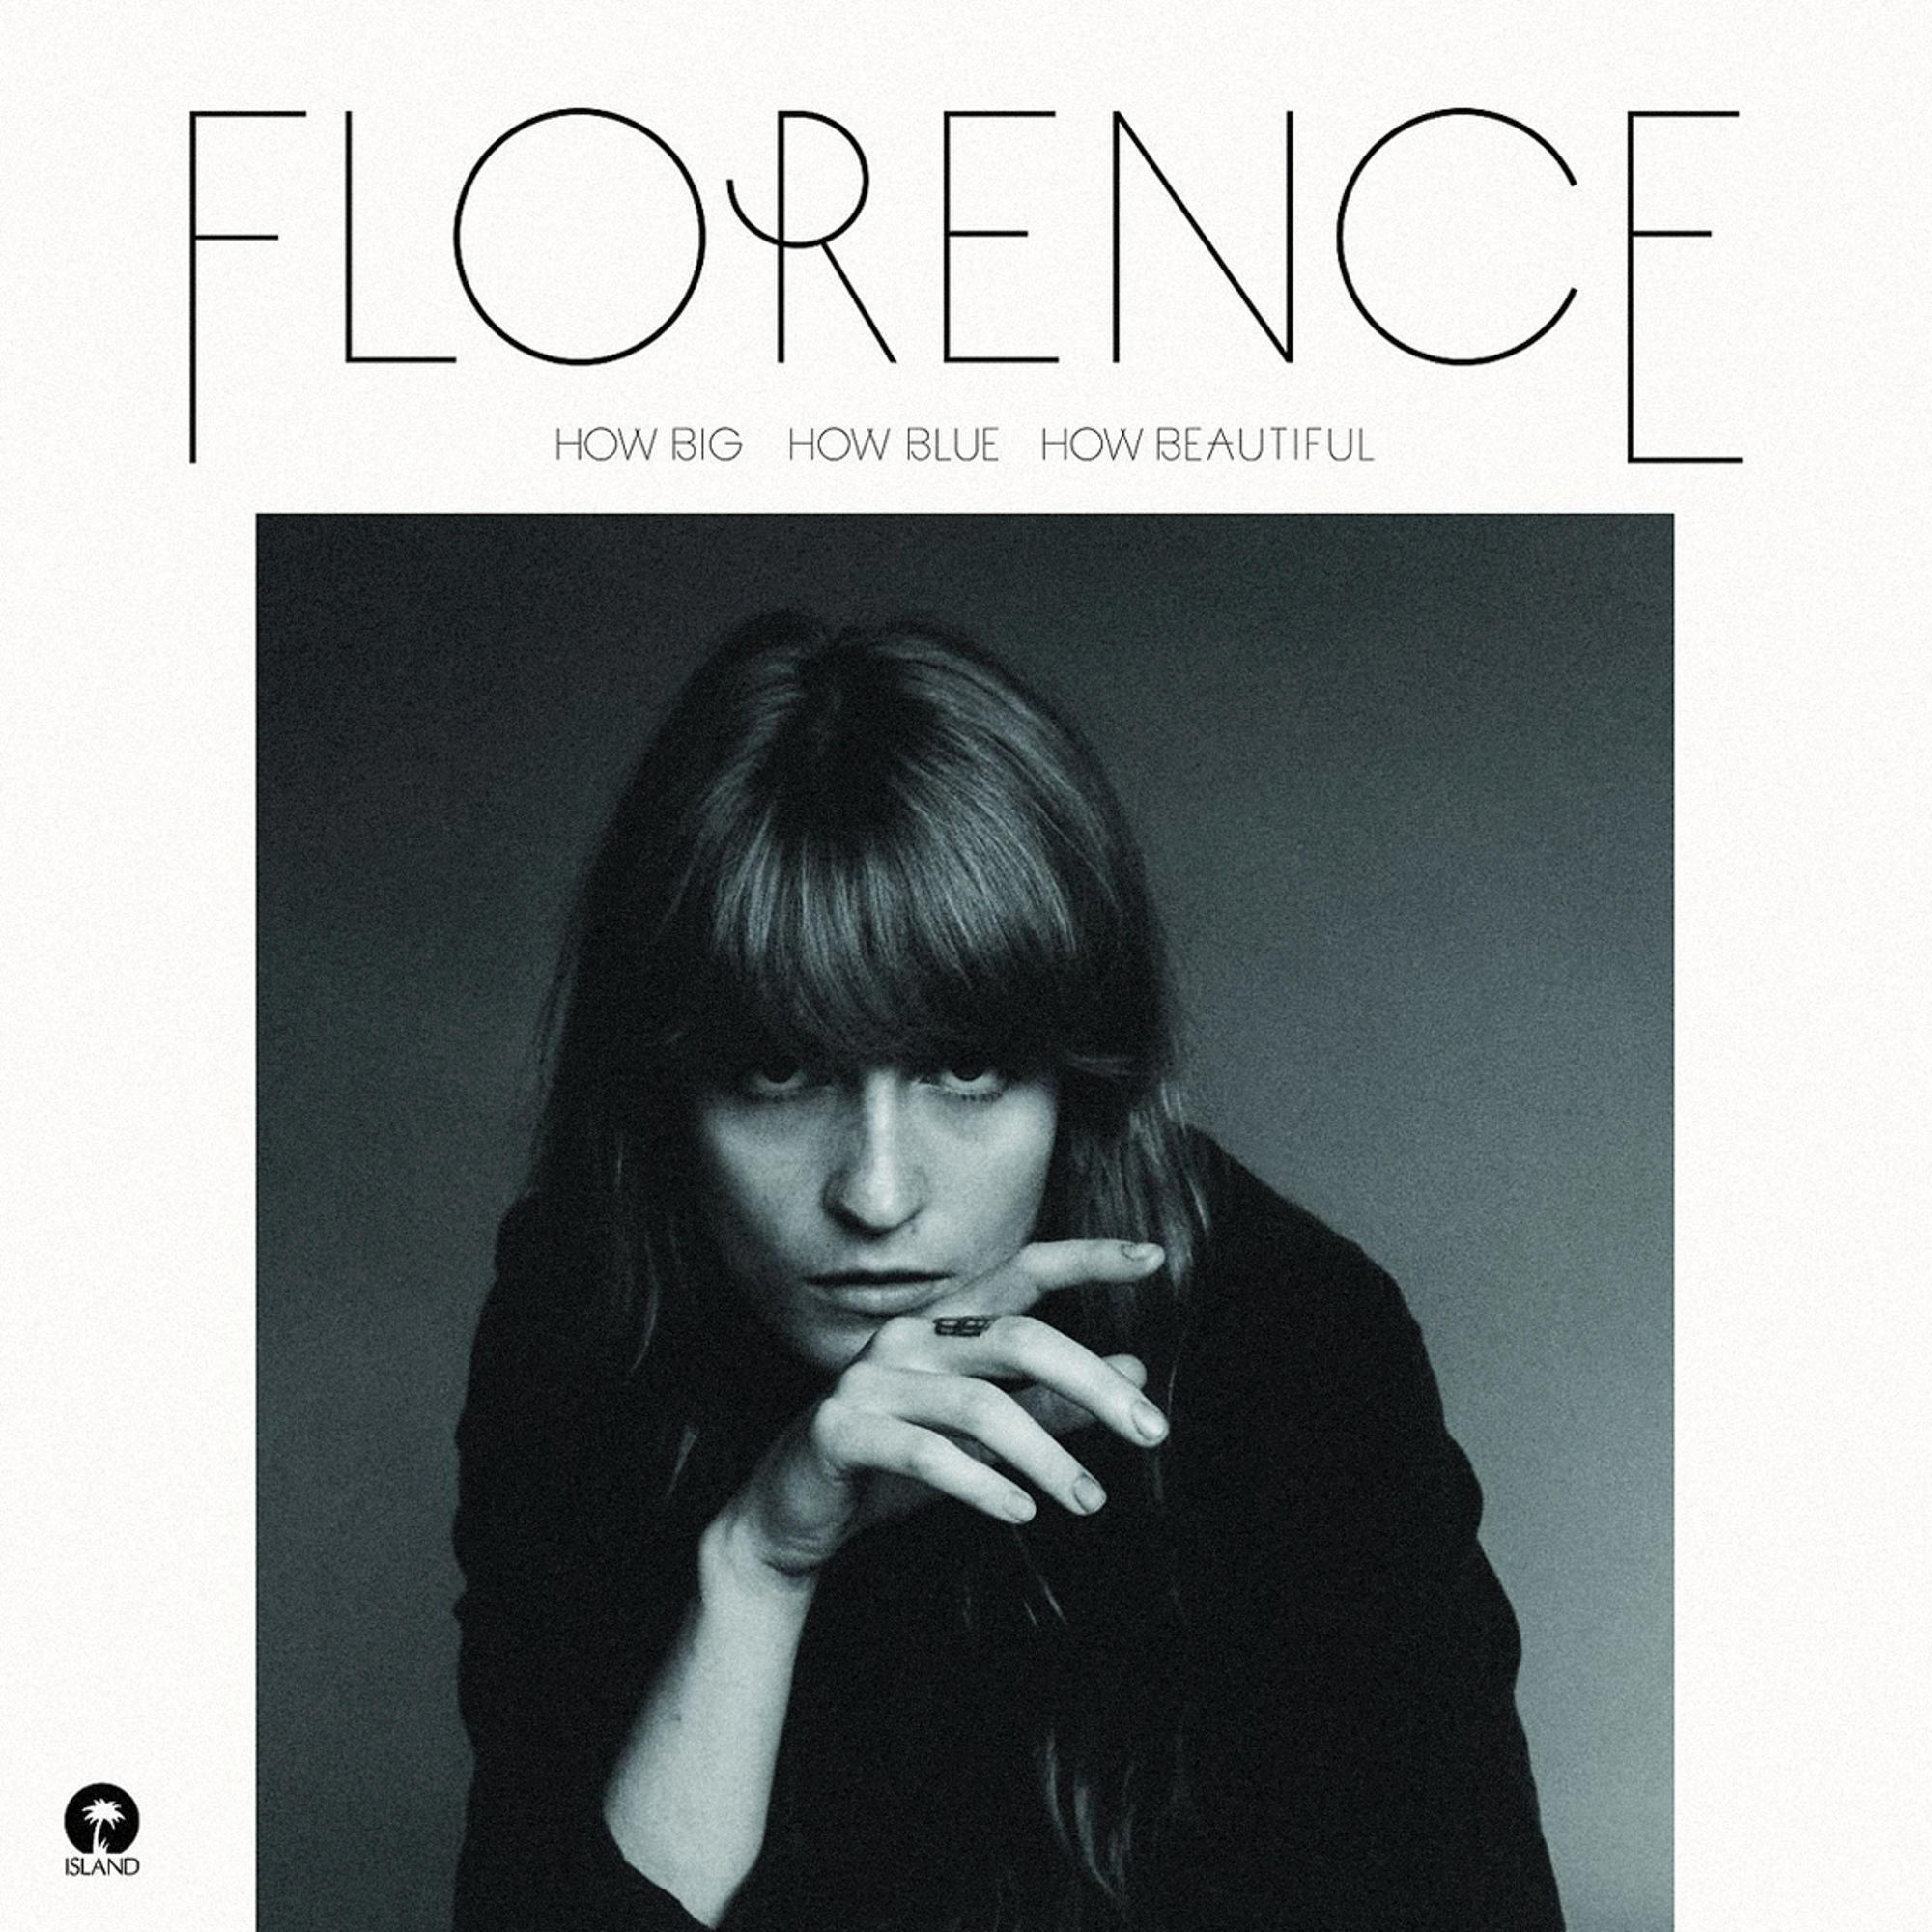 The Blue, How - (Vinyl) + Big, How Beautiful How (2lp) - Machine Florence